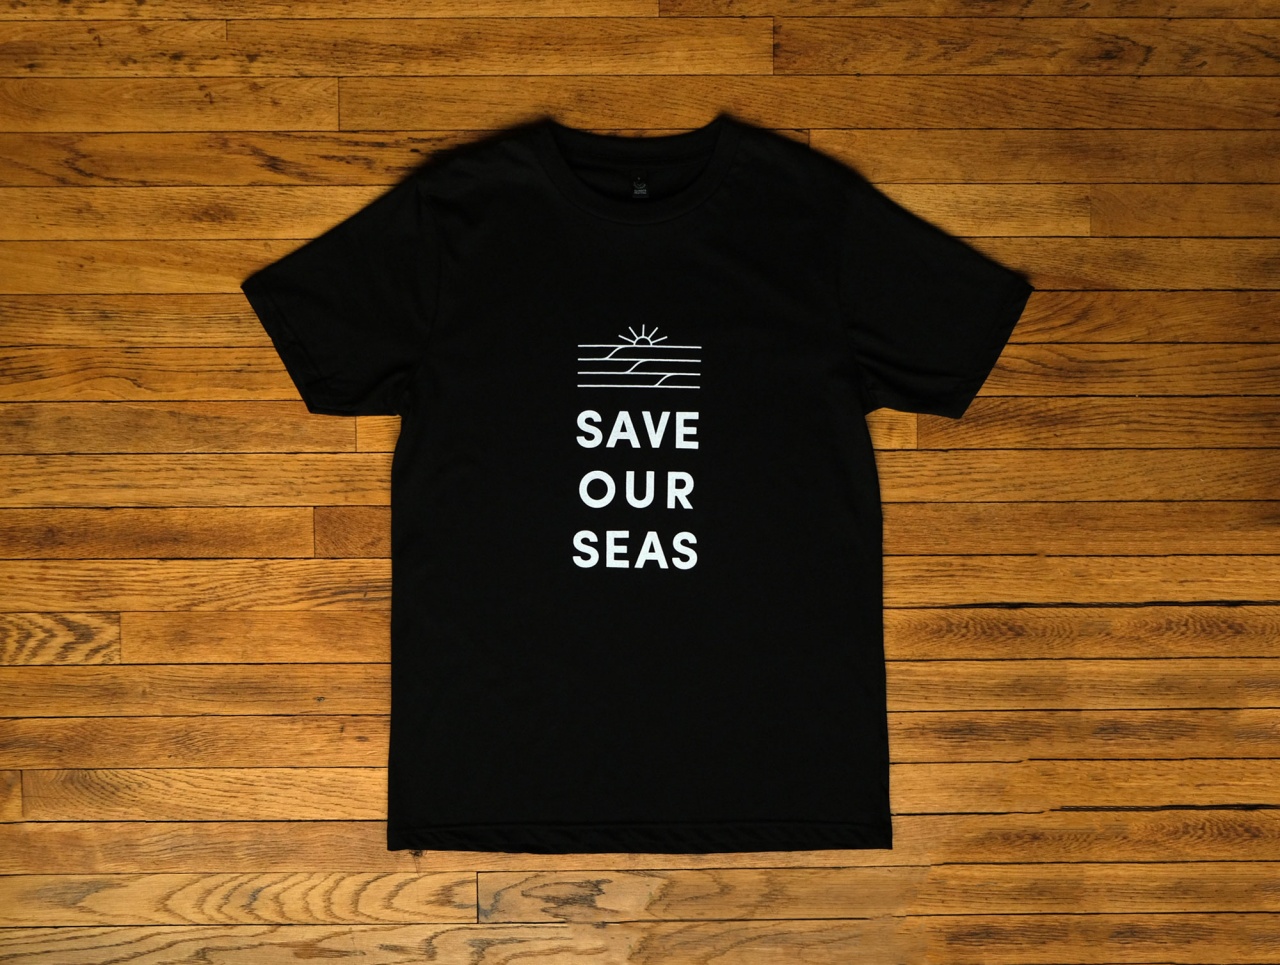 Save Our Seas tee - hover image